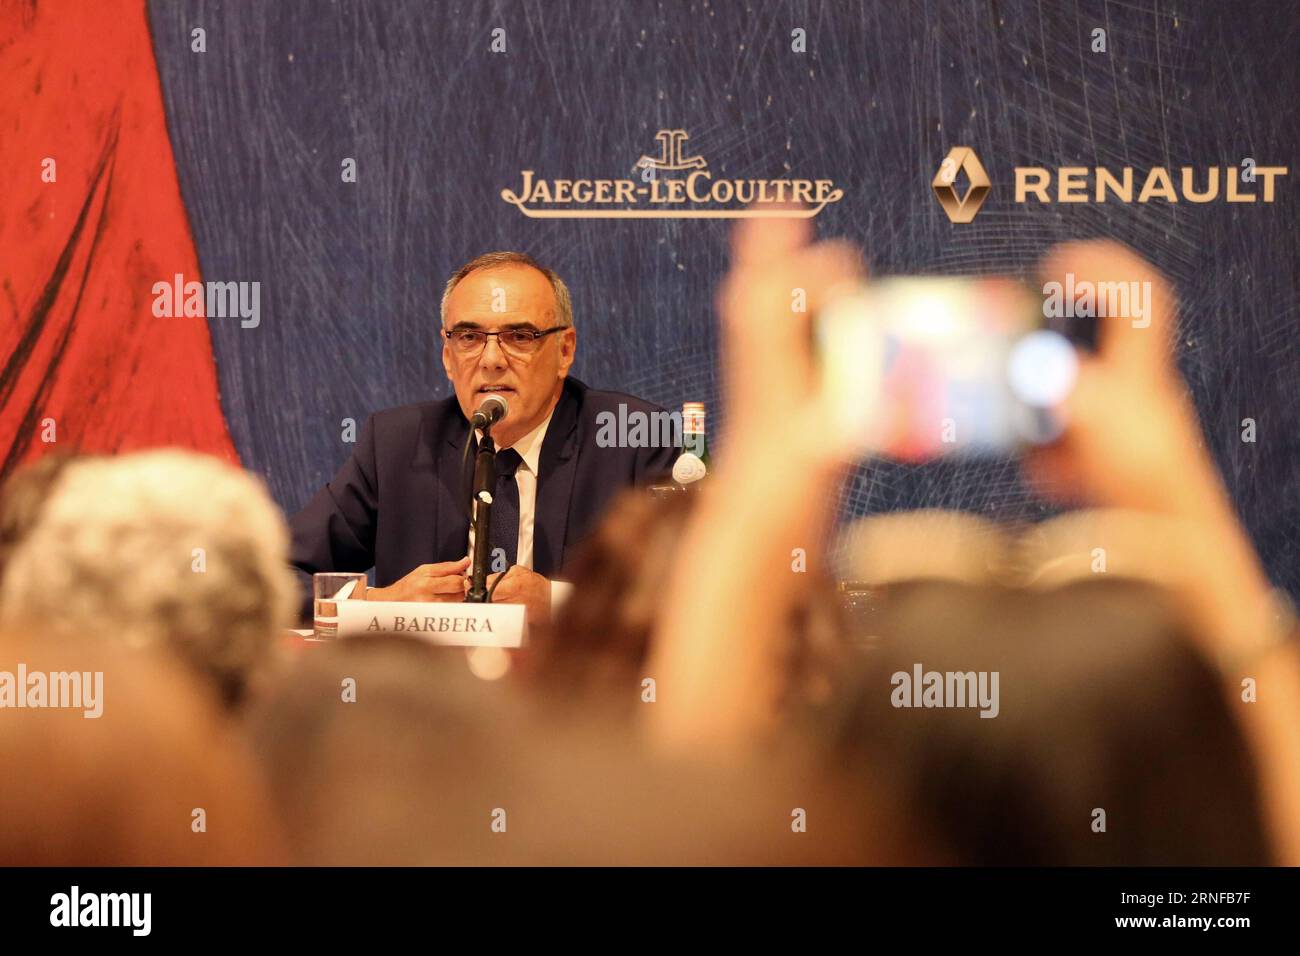 ROME, July 28, 2016 -- Venice Film Festival artistic director Alberto Barbera attends a press conference in Rome, Italy, on July 28, 2016. The complete program of the 2016 Venice Film Festival was unveiled during a press conference on Thursday. Overall, some 20 films will play in the official competition as world premieres, 18 movies and documentaries out of competition, and another 18 in the Horizons international section devoted to new cinema trends. ) (wjd) ITALY-ROME-VENICE FILM FESTIVAL LUOxNA PUBLICATIONxNOTxINxCHN   Rome July 28 2016 Venice Film Festival ARTISTIC Director Alberto Barber Stock Photo